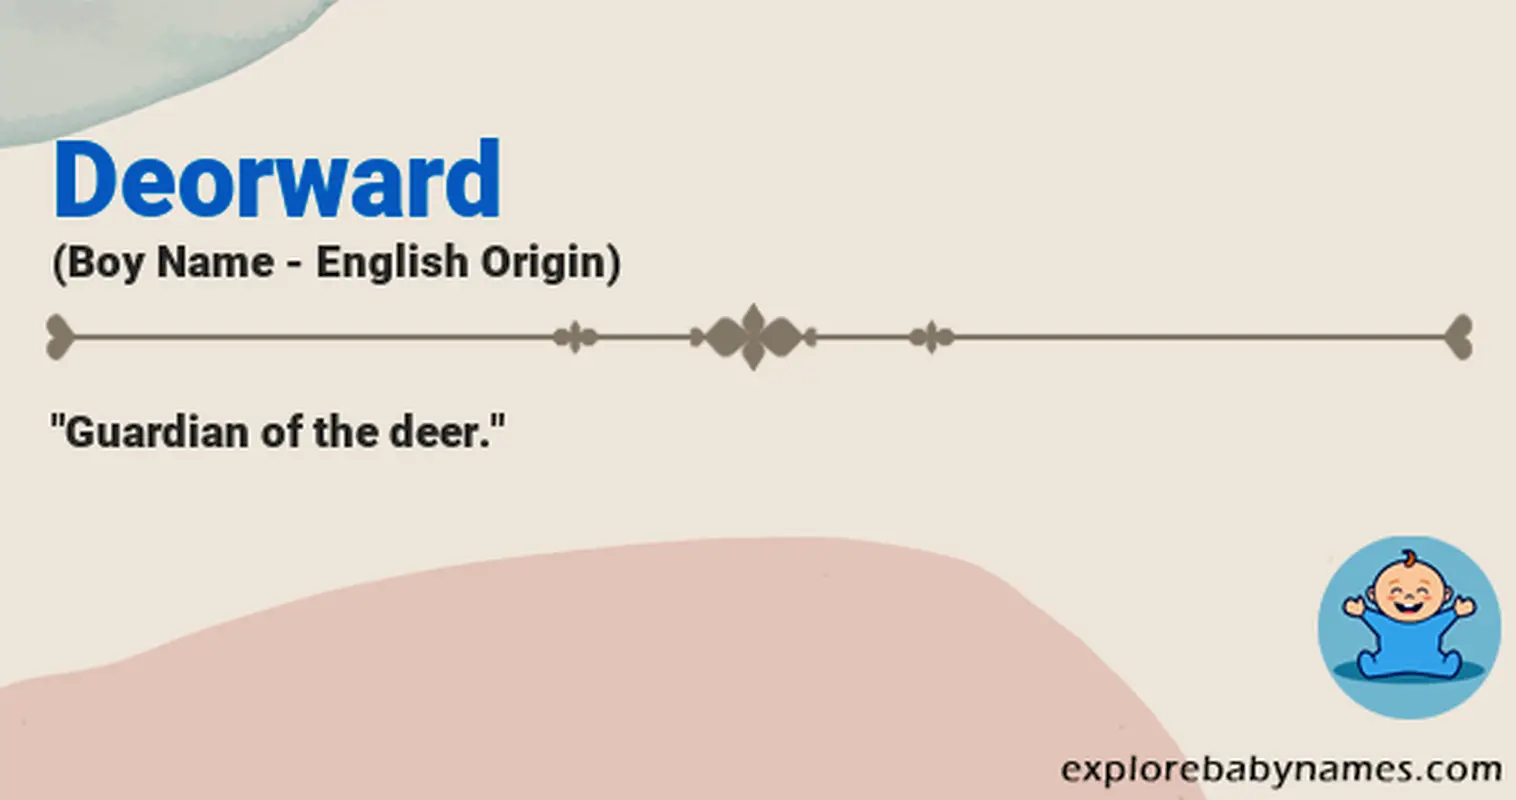 Meaning of Deorward